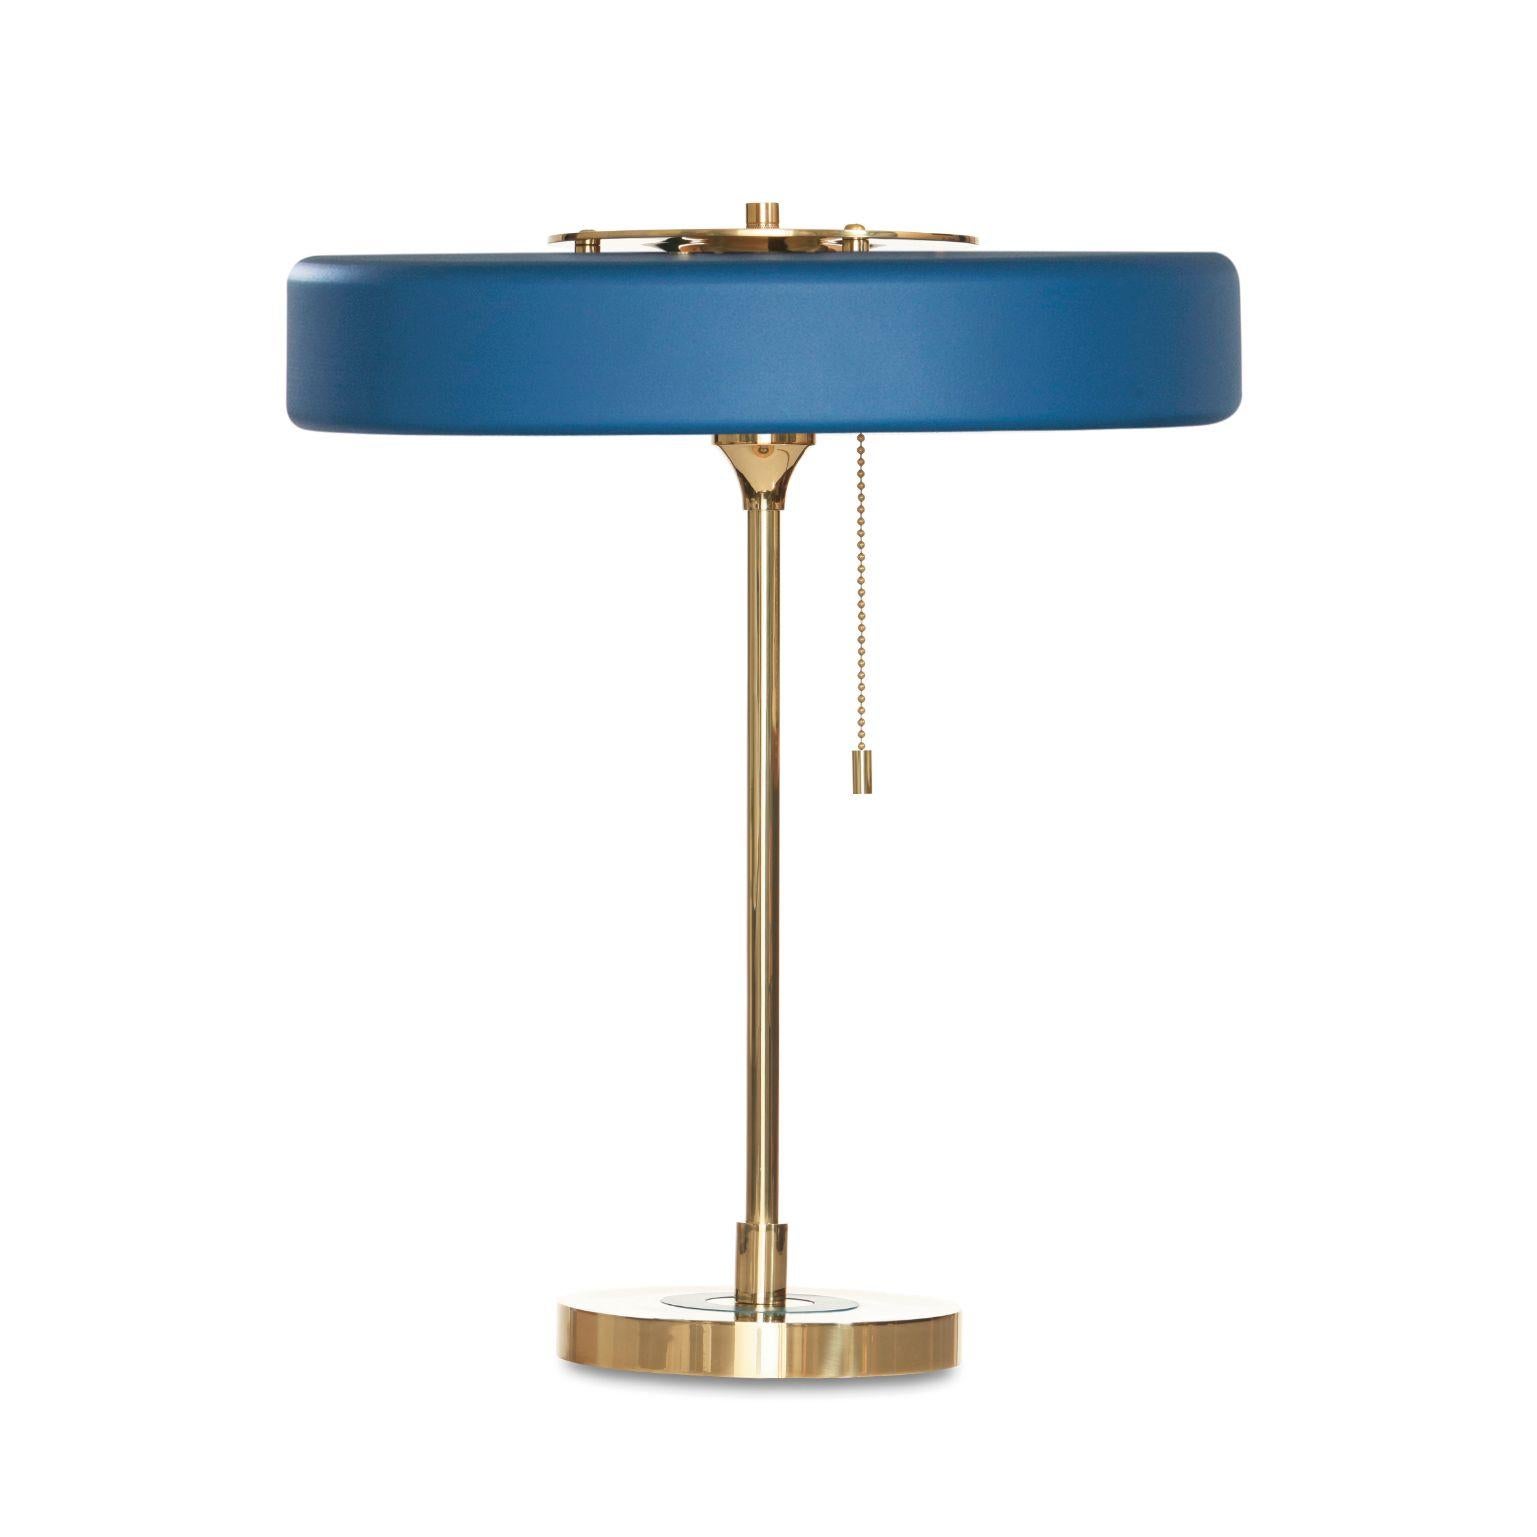 Revolve table lamp - Polished brass - Blue by Bert Frank
Dimensions: 42 x 35 x 15 cm
Materials: Brass, steel

Also available in brushed brass

When Adam Yeats and Robbie Llewellyn founded Bert Frank in 2013 it was a meeting of minds and the start of